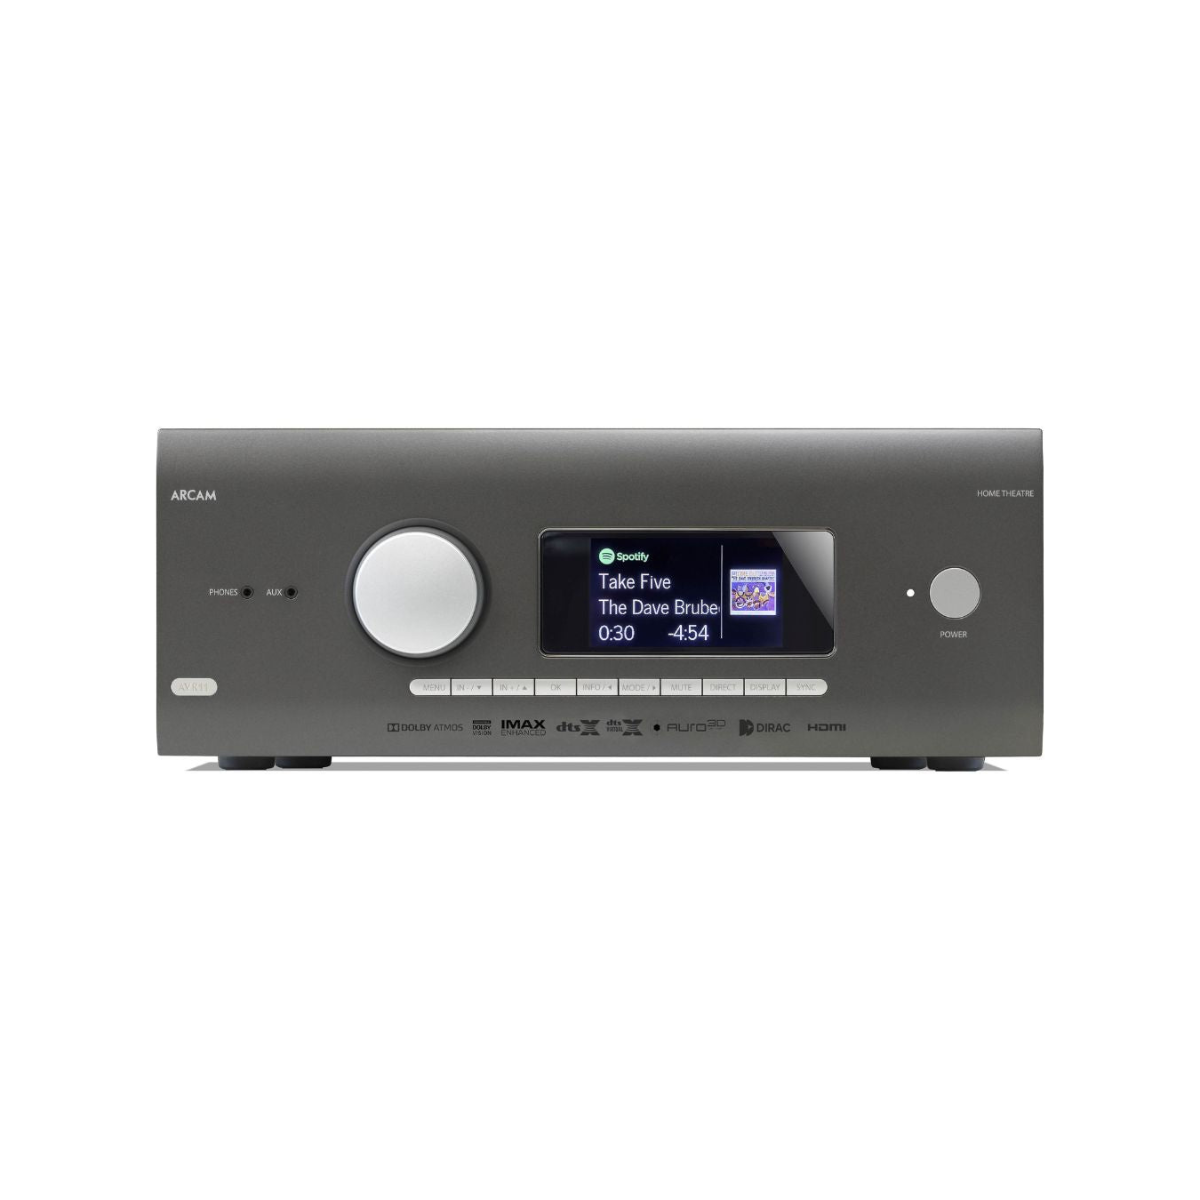 Arcam AVR11 - HDMI 2.1 Class AB 7.2 Channel AV Receiver front view